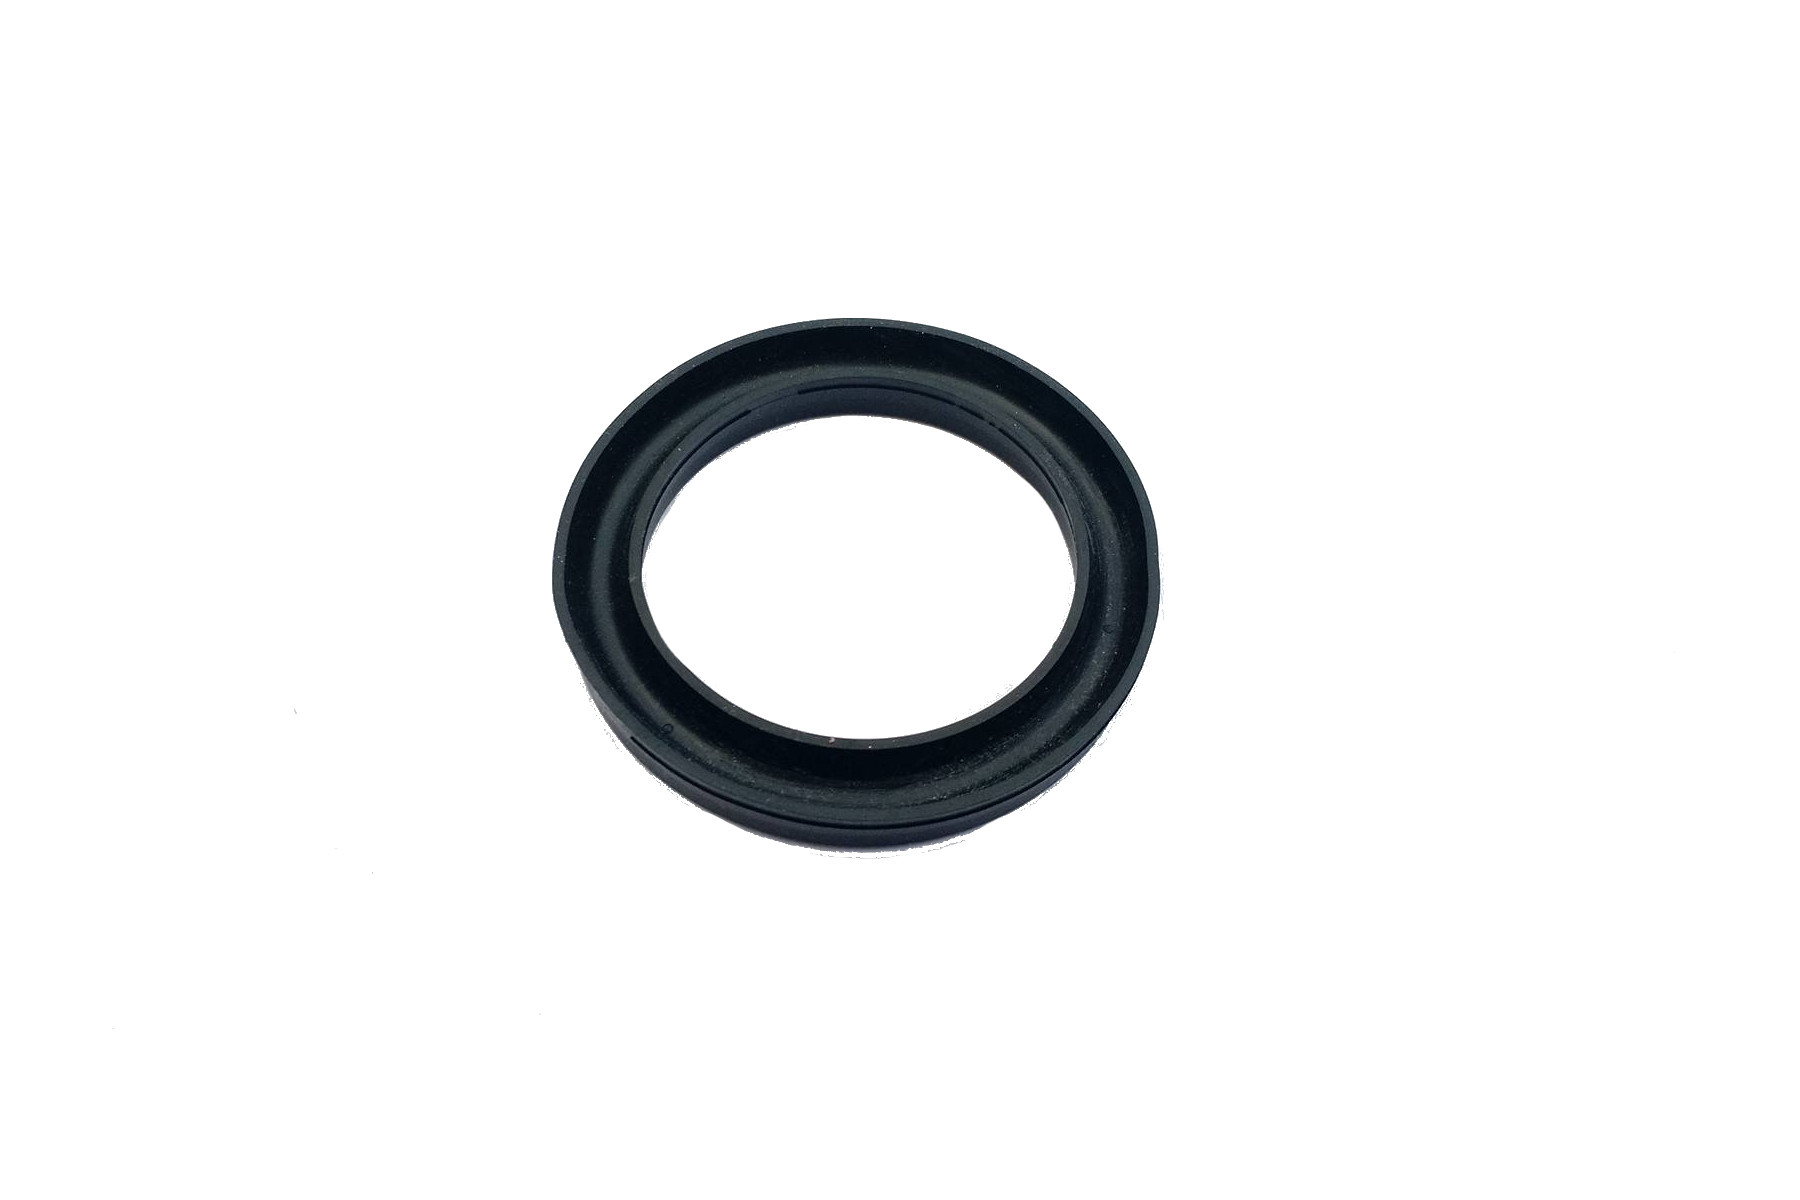  U-Cup Piston Seal. Part number SHW-069-OLD